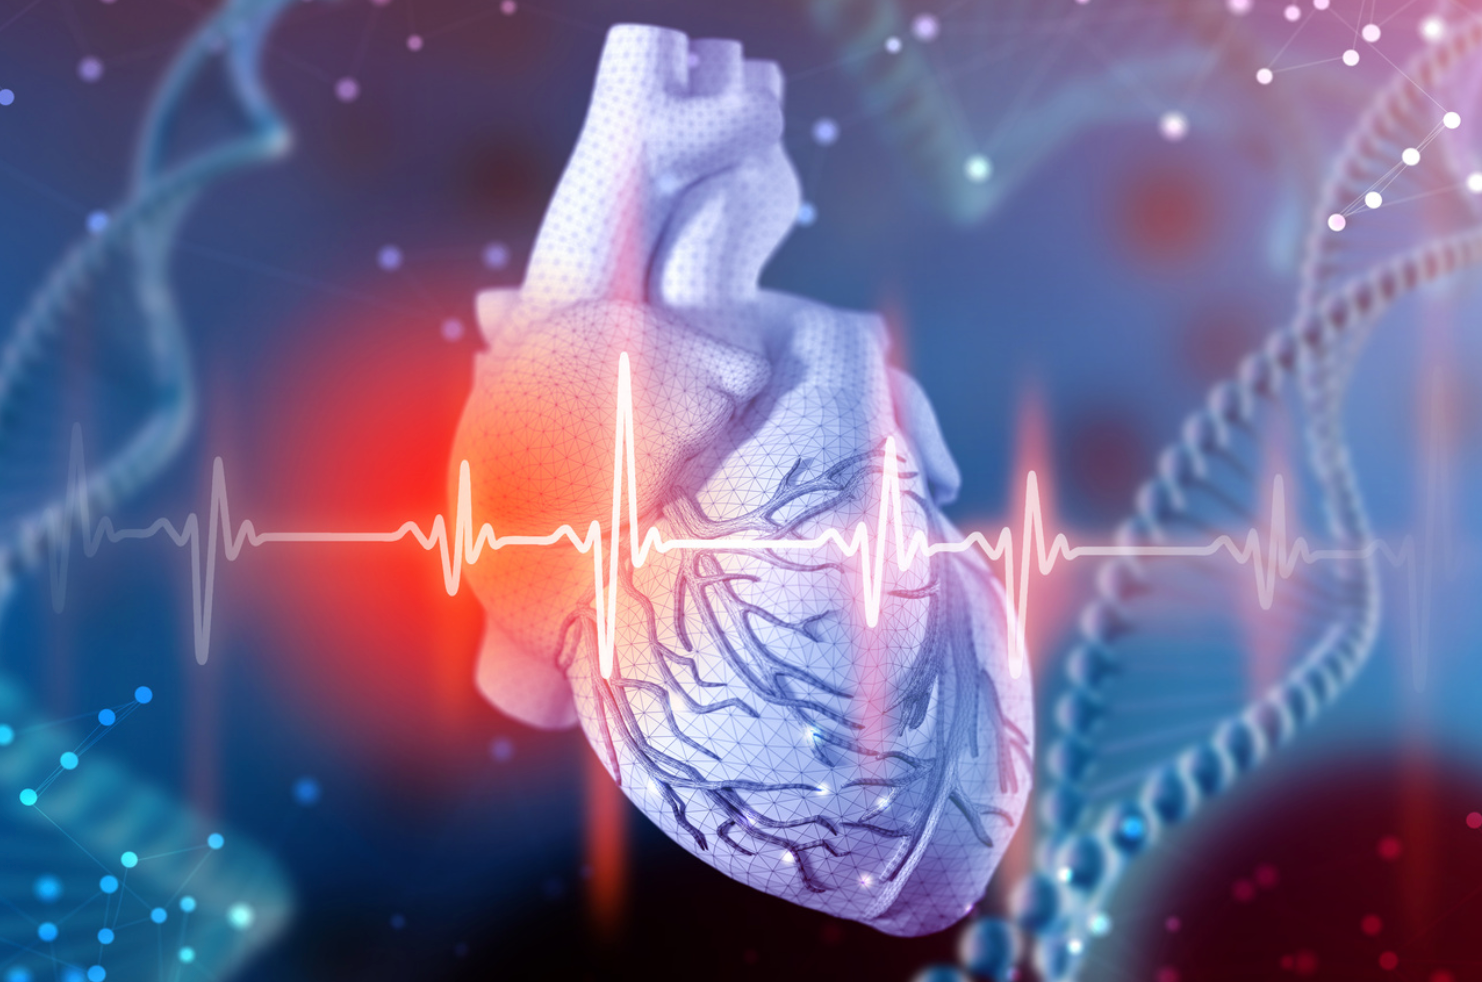 Tracking Potential Triggers May Reduce Number of Episodes for Patients With Atrial Fibrillation